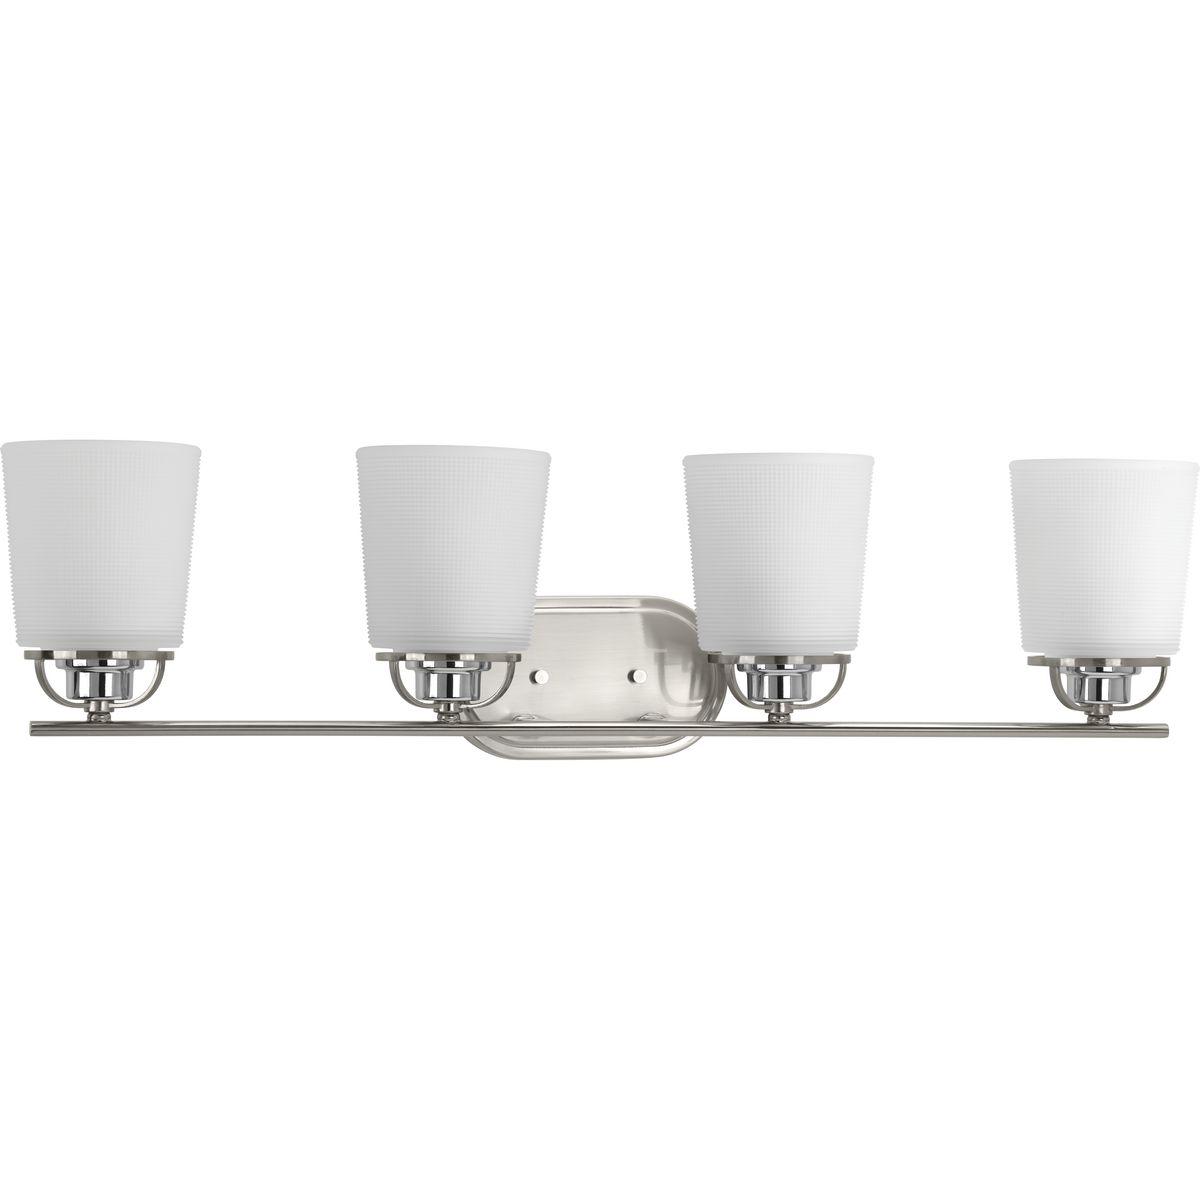 Hubbell P300007-009 A modern form with industrial-inspired accents are featured in West Village. Double prismatic glass shades provide a beautiful illumination effect. Visual interest continues with a three-spoke design that holds each glass shade. Brushed Nickel with chrome